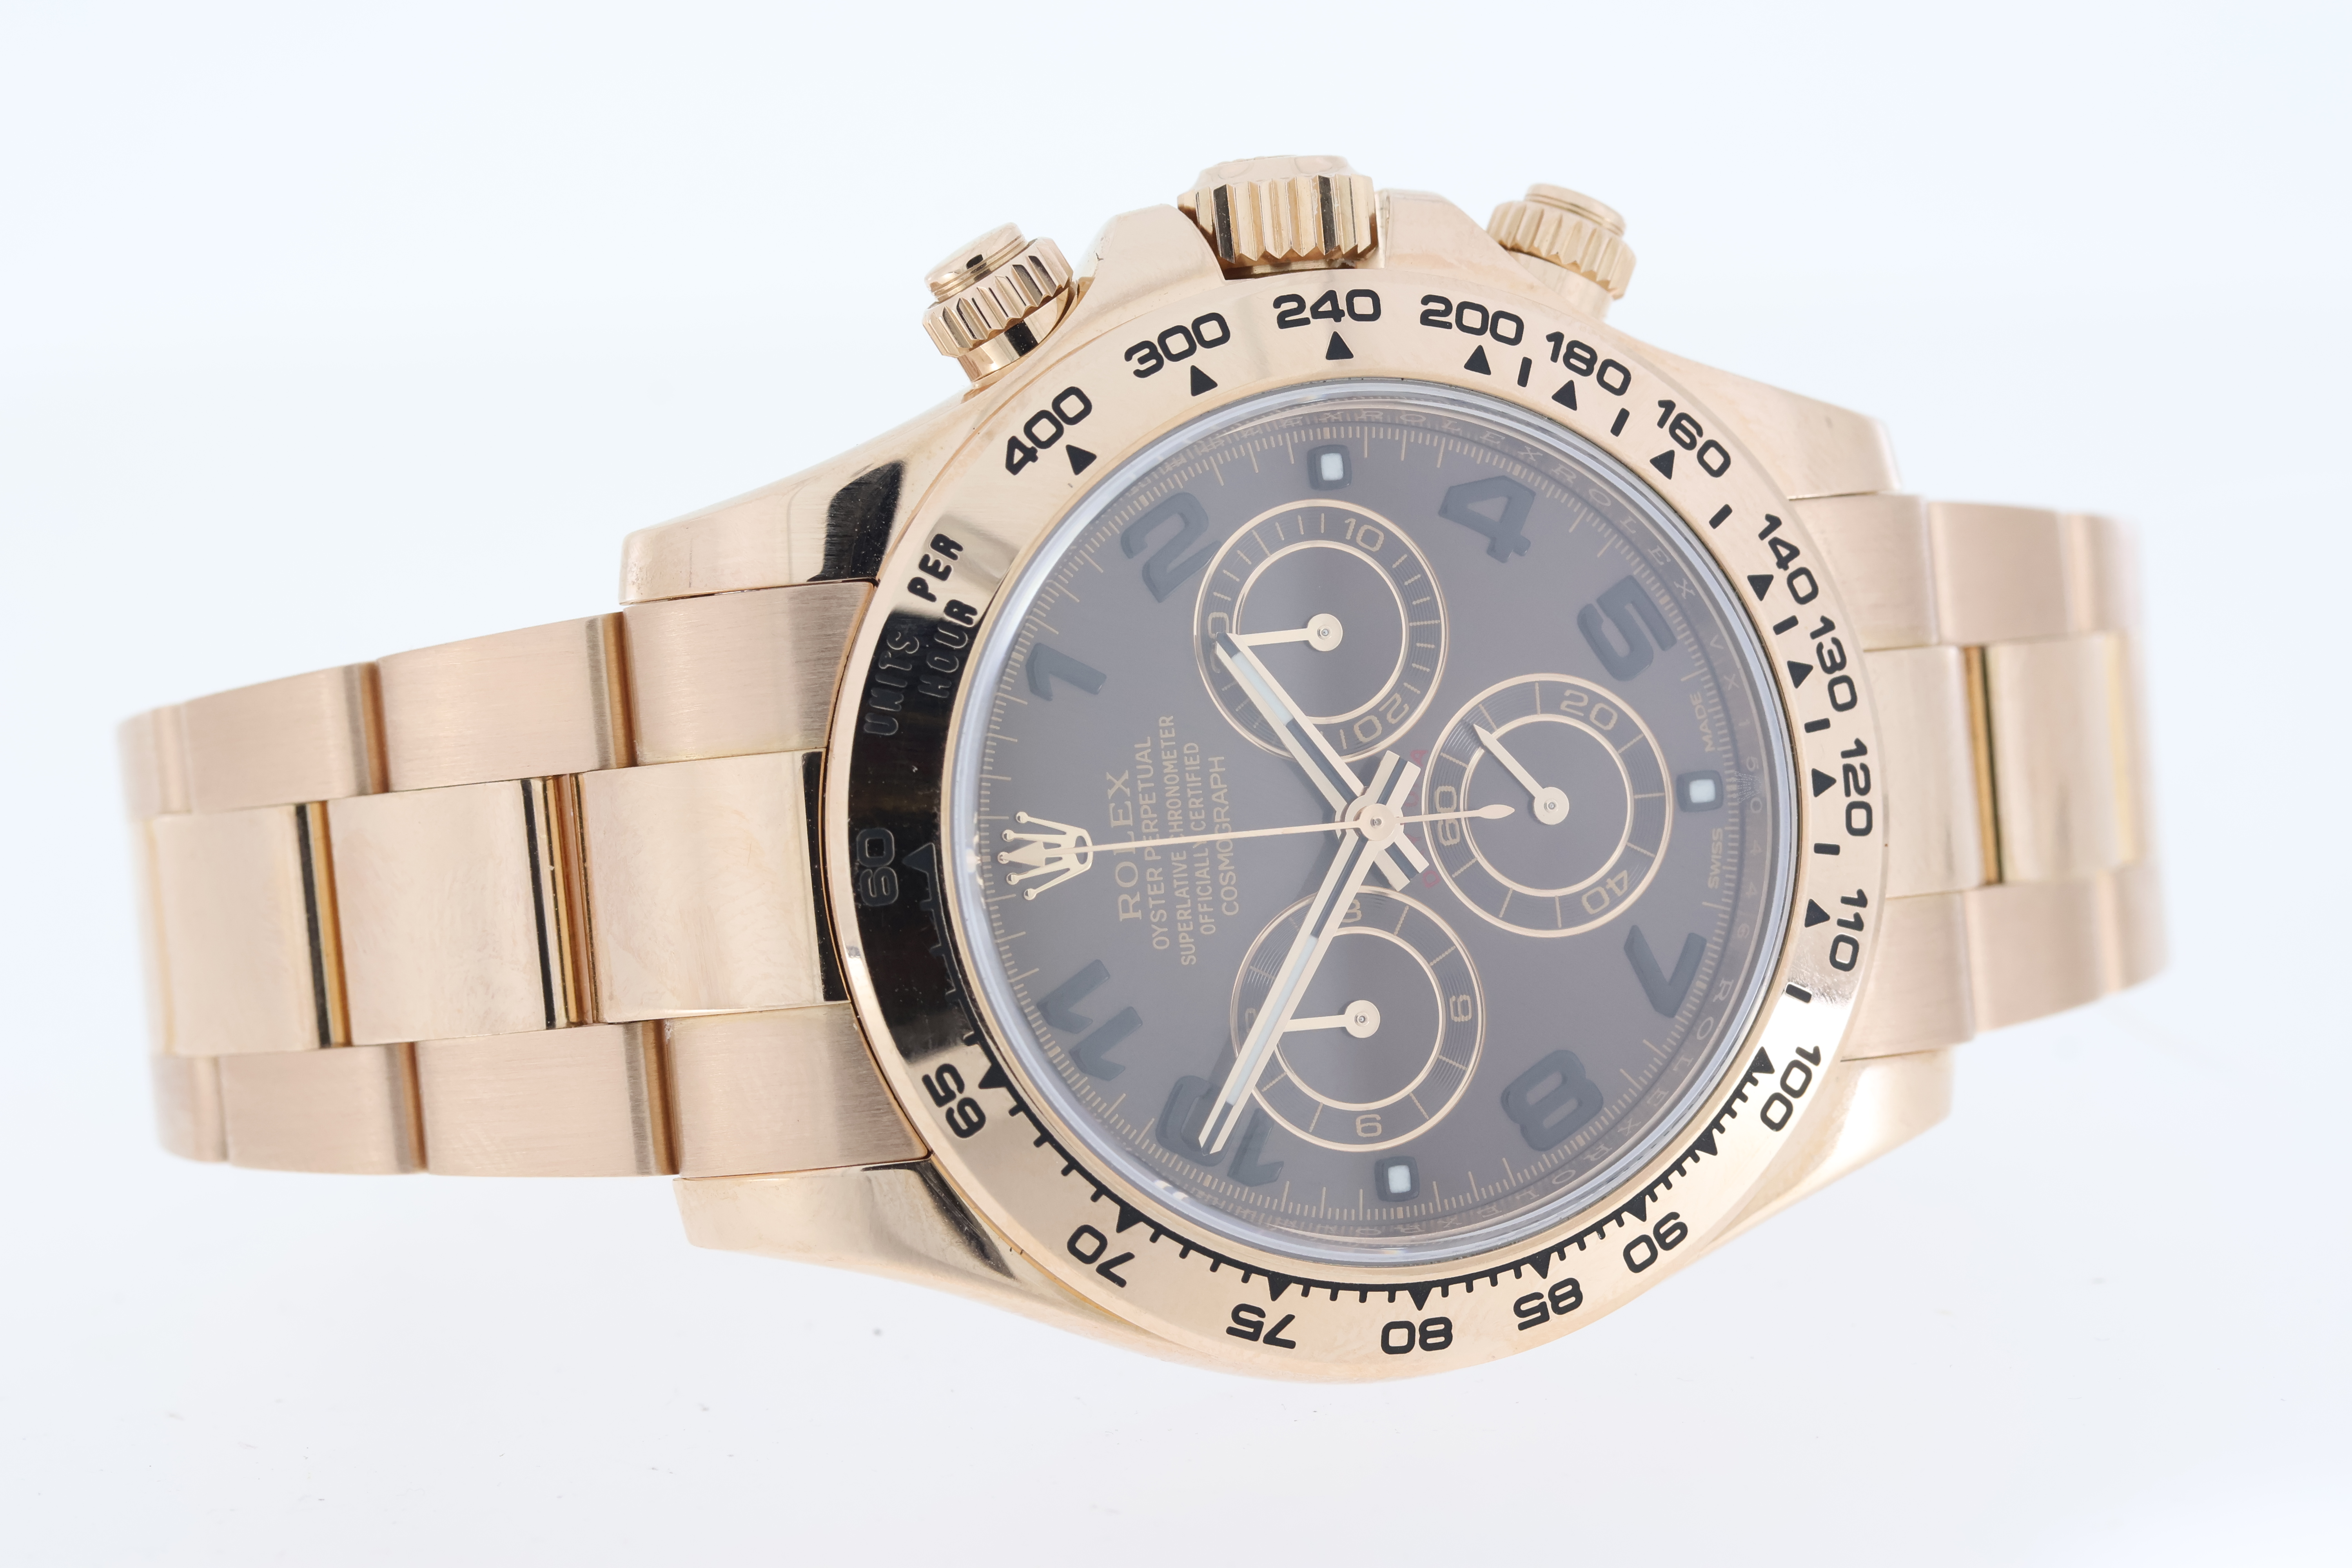 18ct Rolex Daytona Rose Gold Reference 16505 with Box - Image 3 of 7